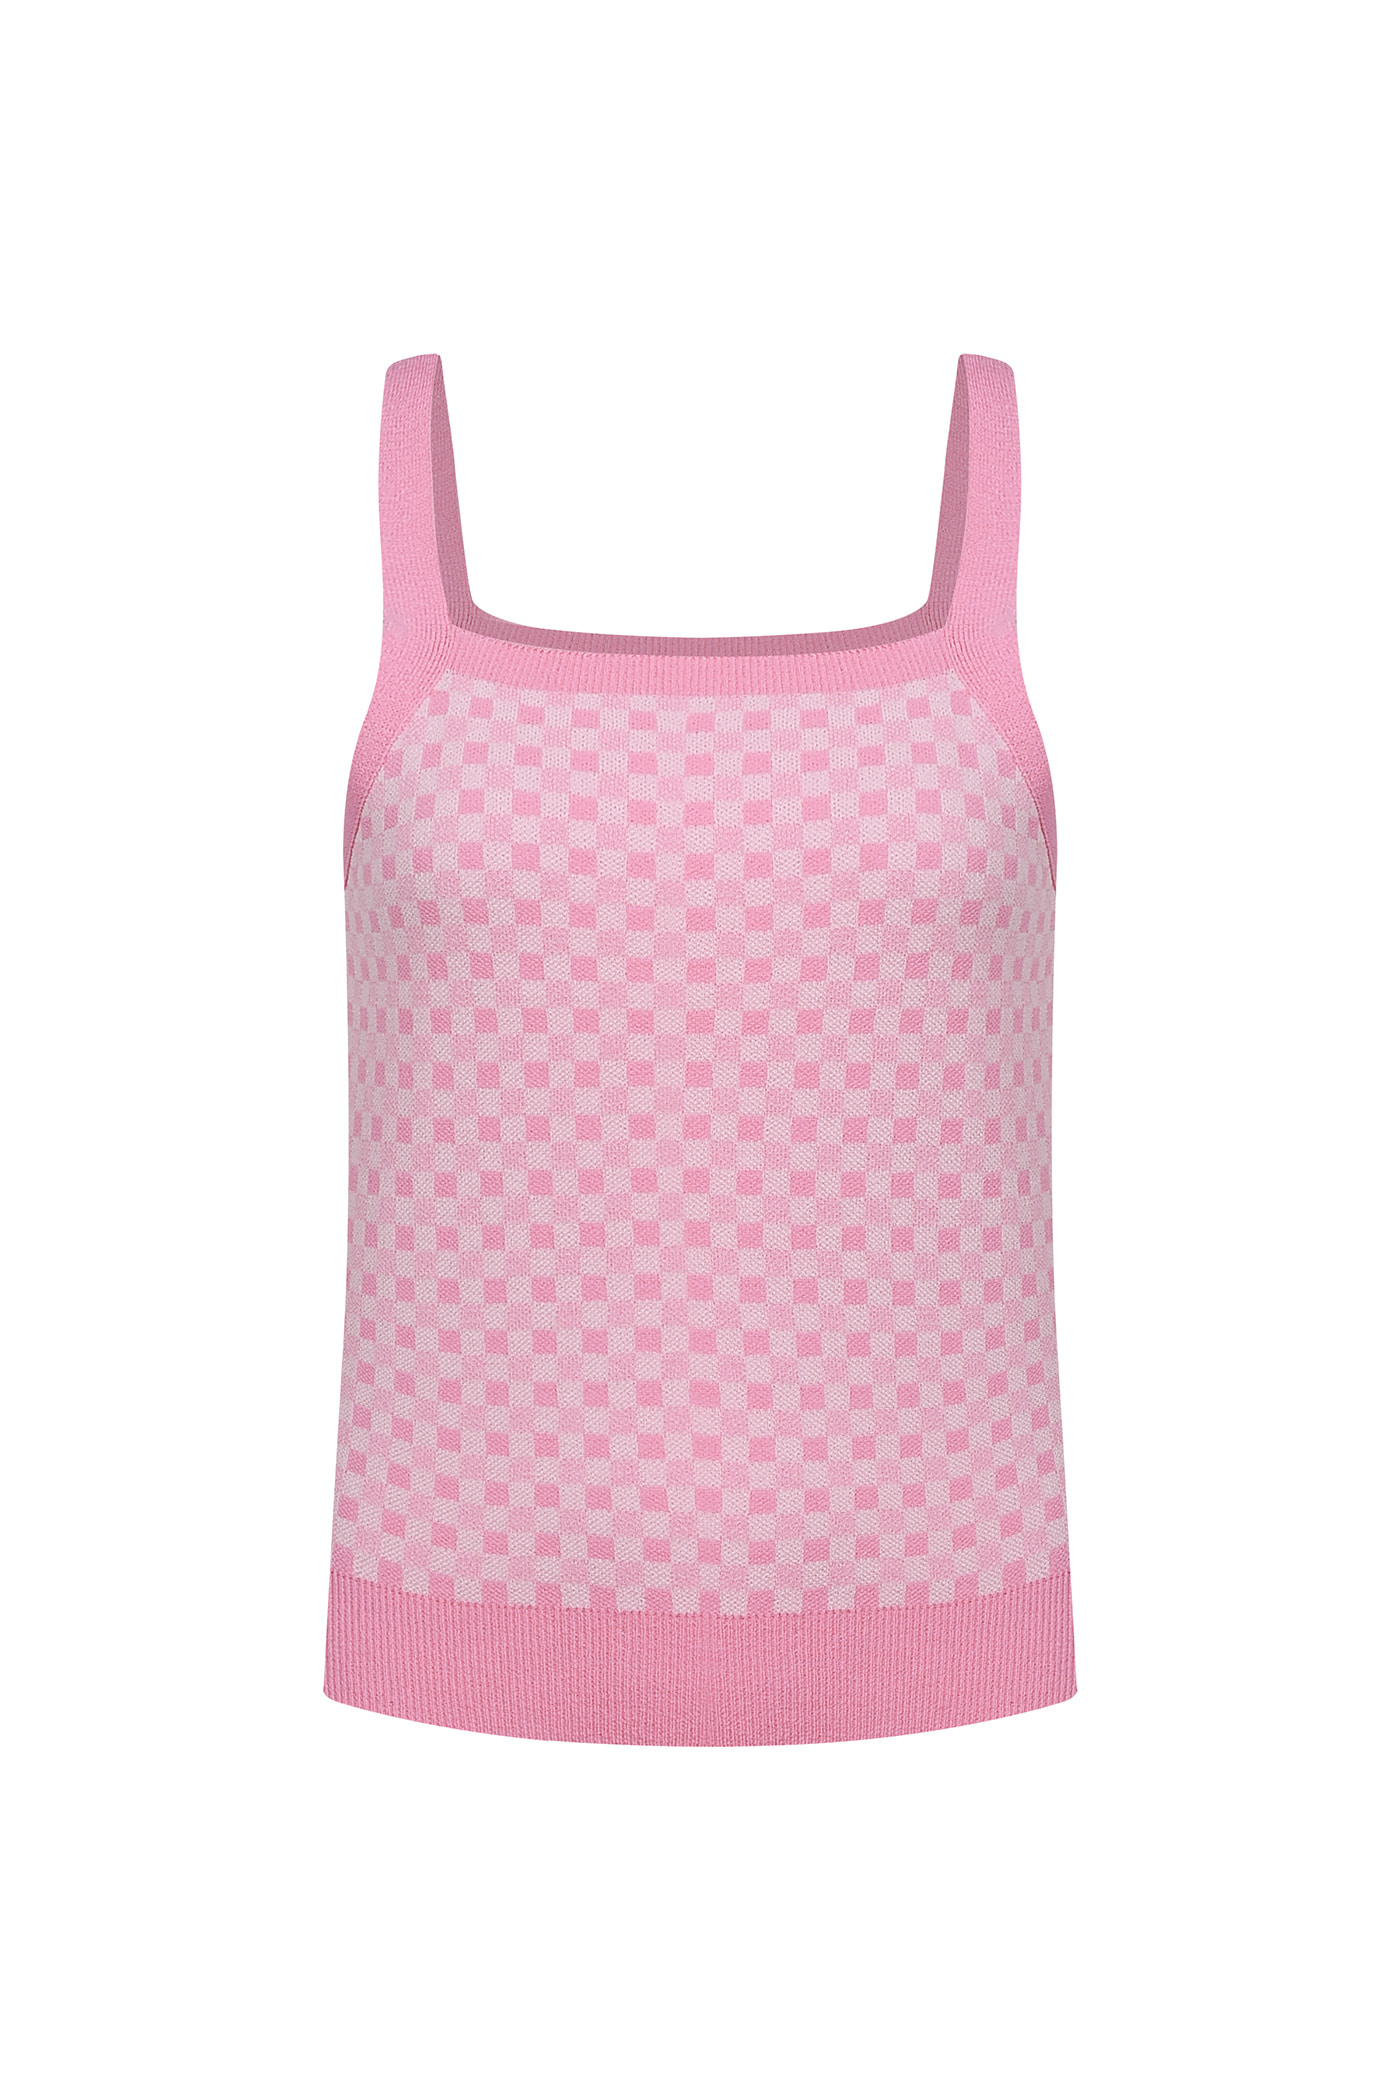 Gingham Check Sleeveless Knit Top-Pink